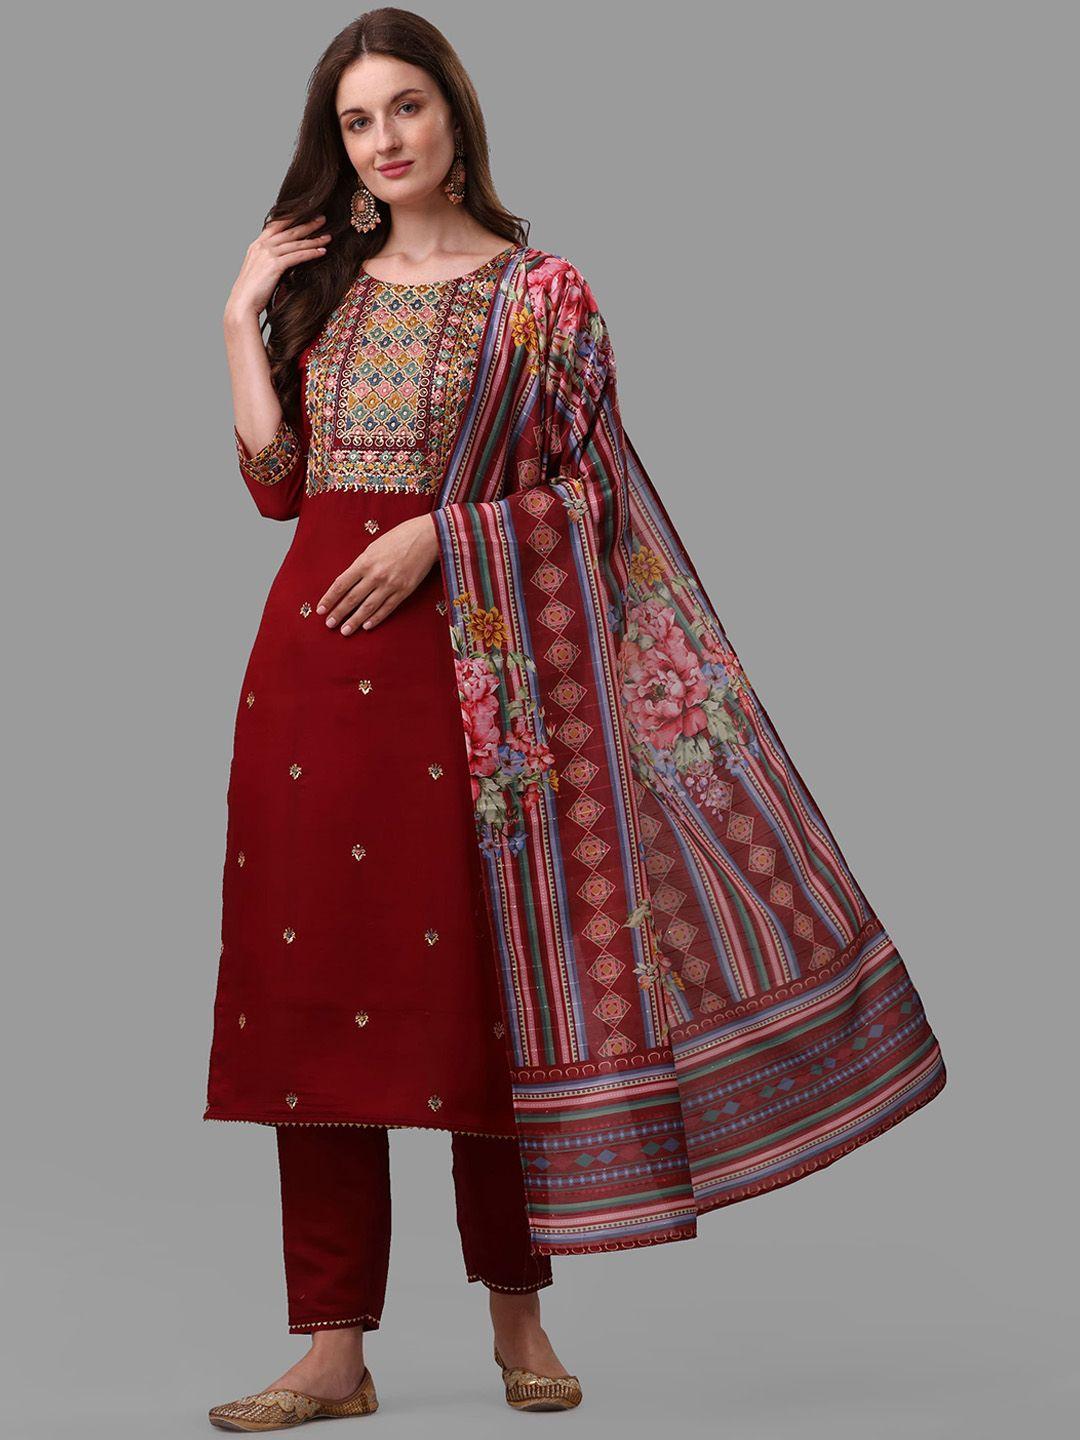 Berrylicious Women Maroon Floral Embroidered Chanderi Cotton Kurta with Trousers & With Dupatta